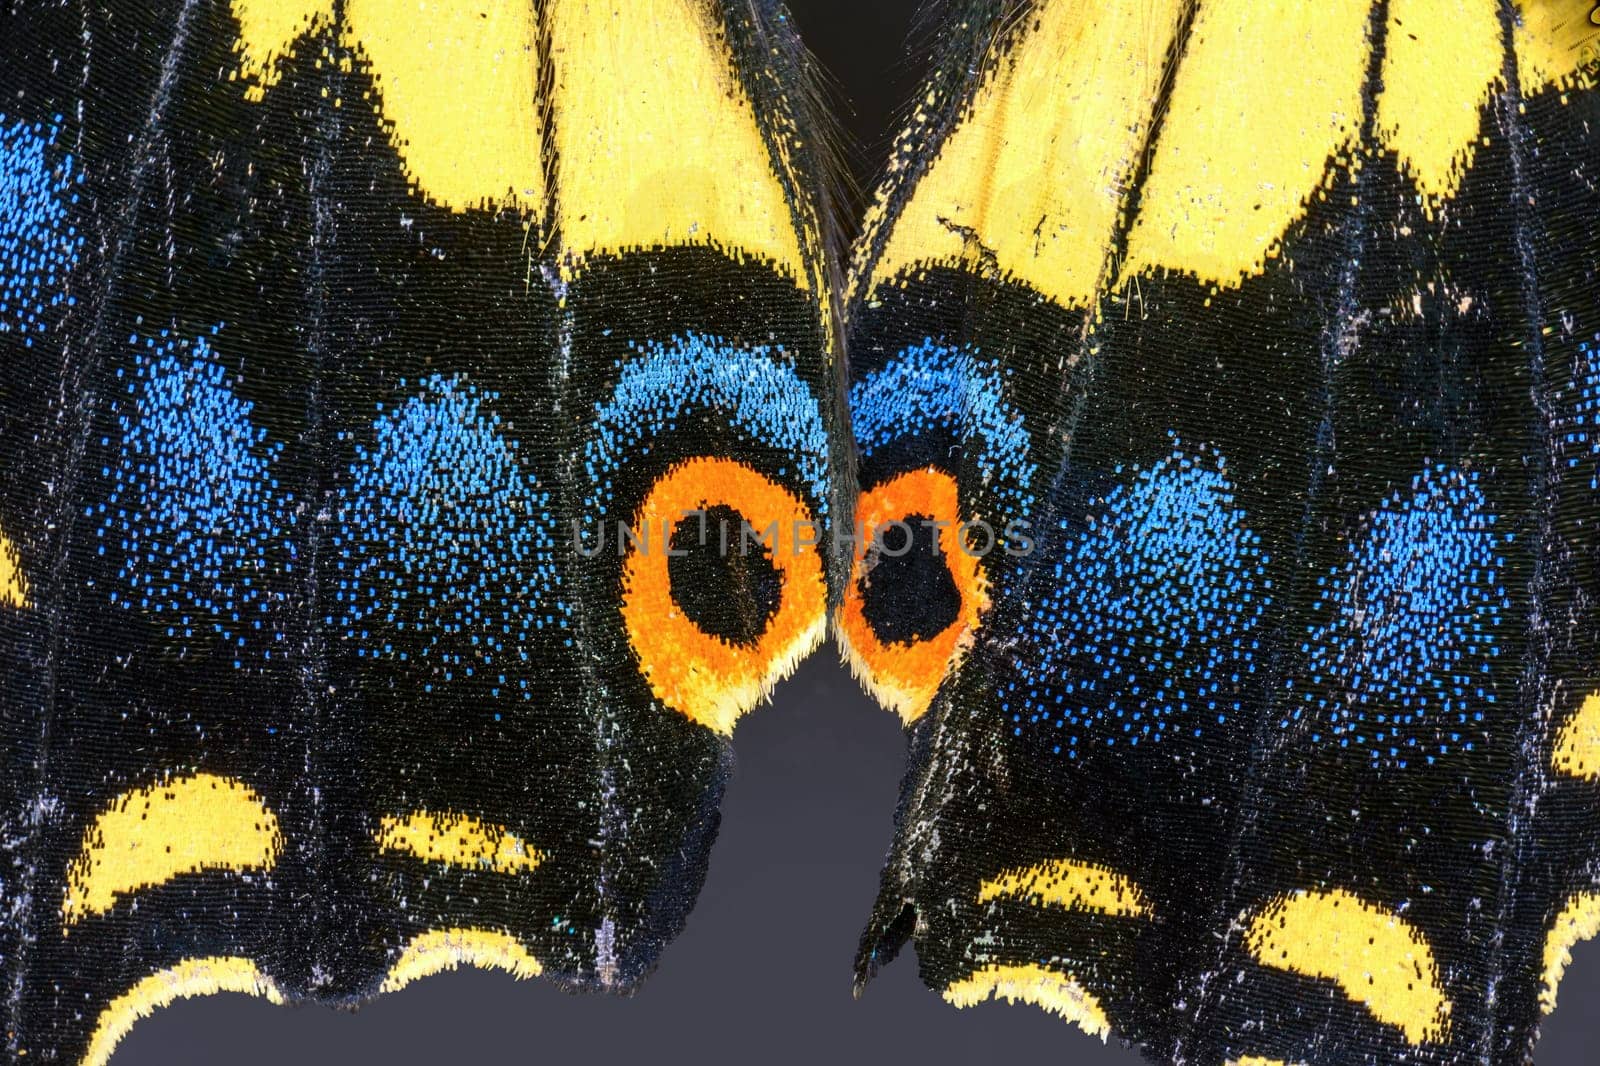 Anise Swallowtail Butterfly, Papilio zelicaon, extreme macro closeup of blue, yellow, black and orange wing scales. Rosarito, Baja California. 40 photo stack.